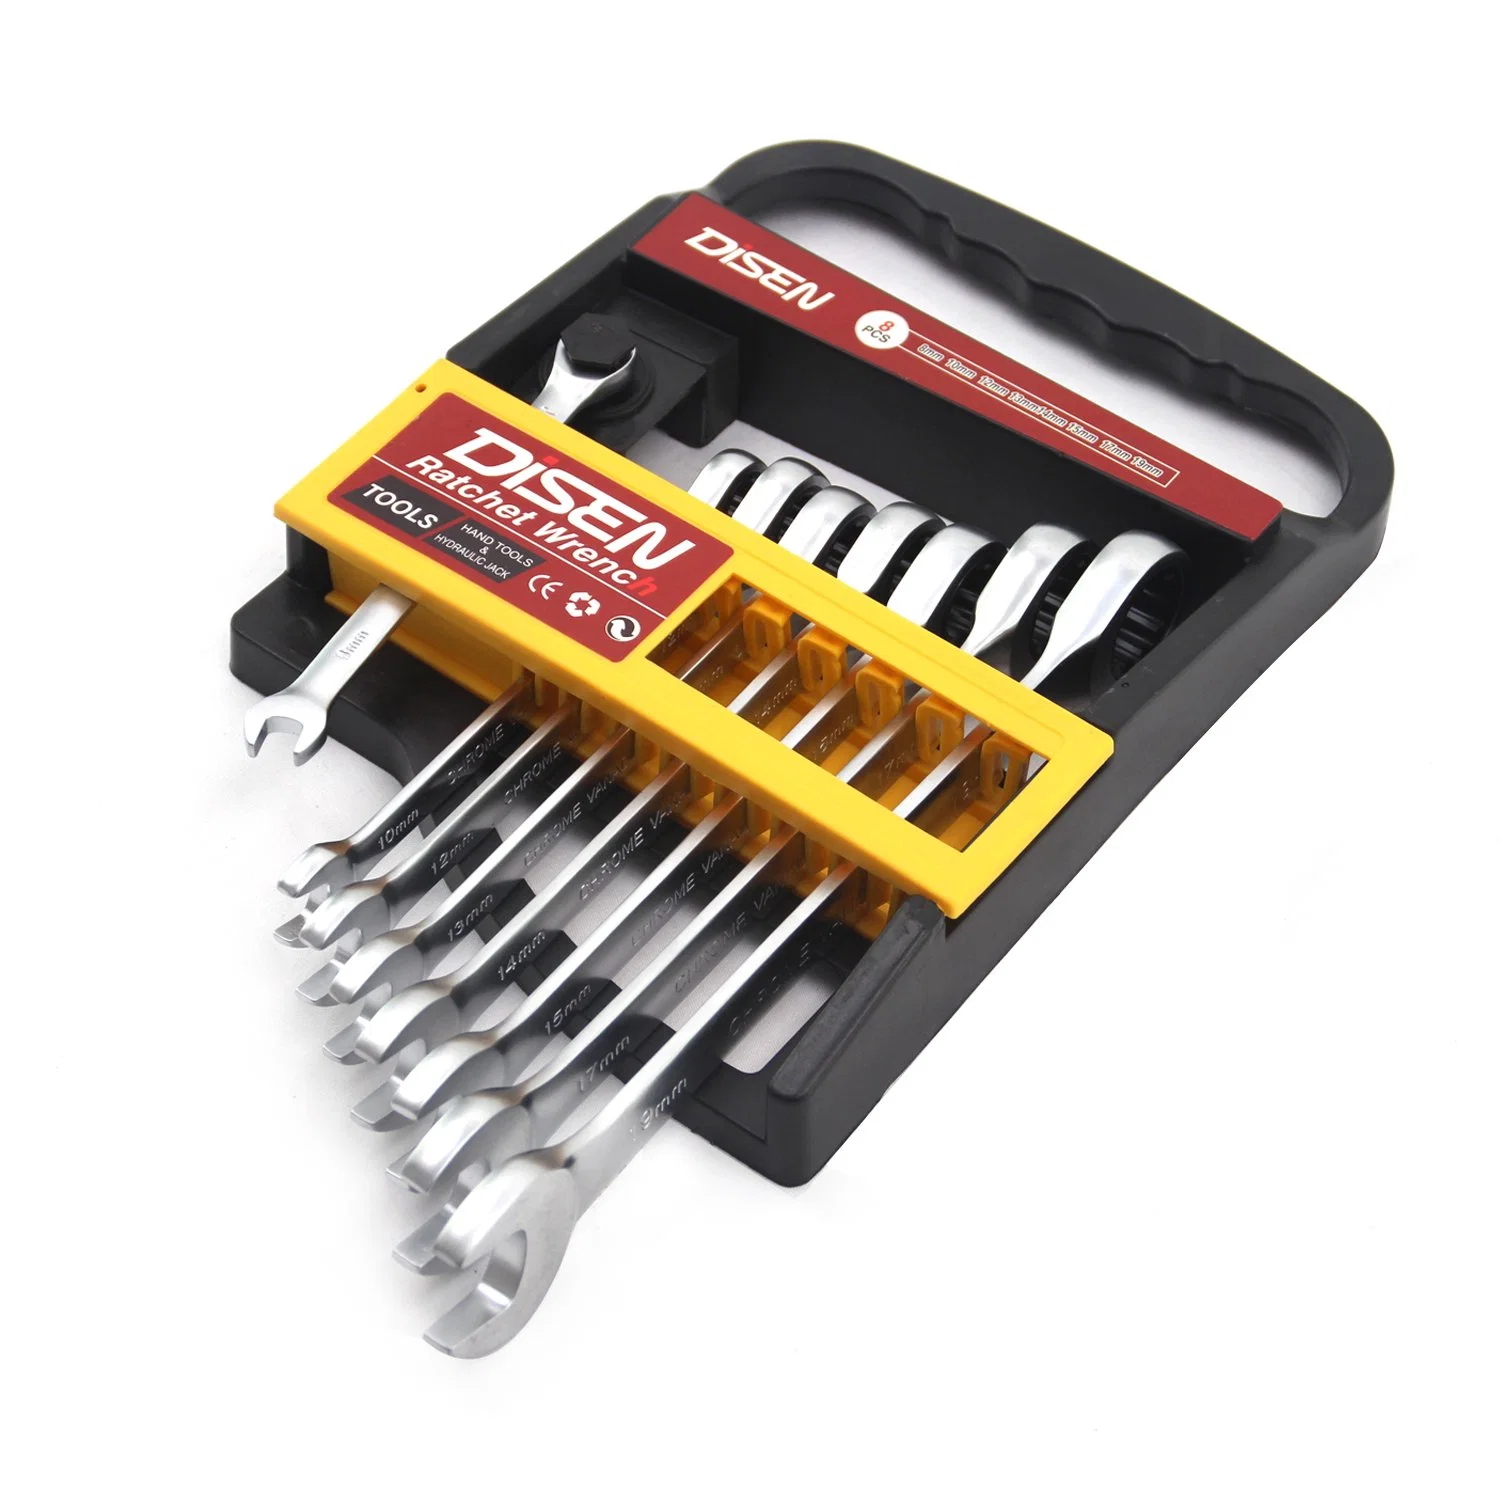 Ratchet Wrench Set Hand Tools Carbon Steel